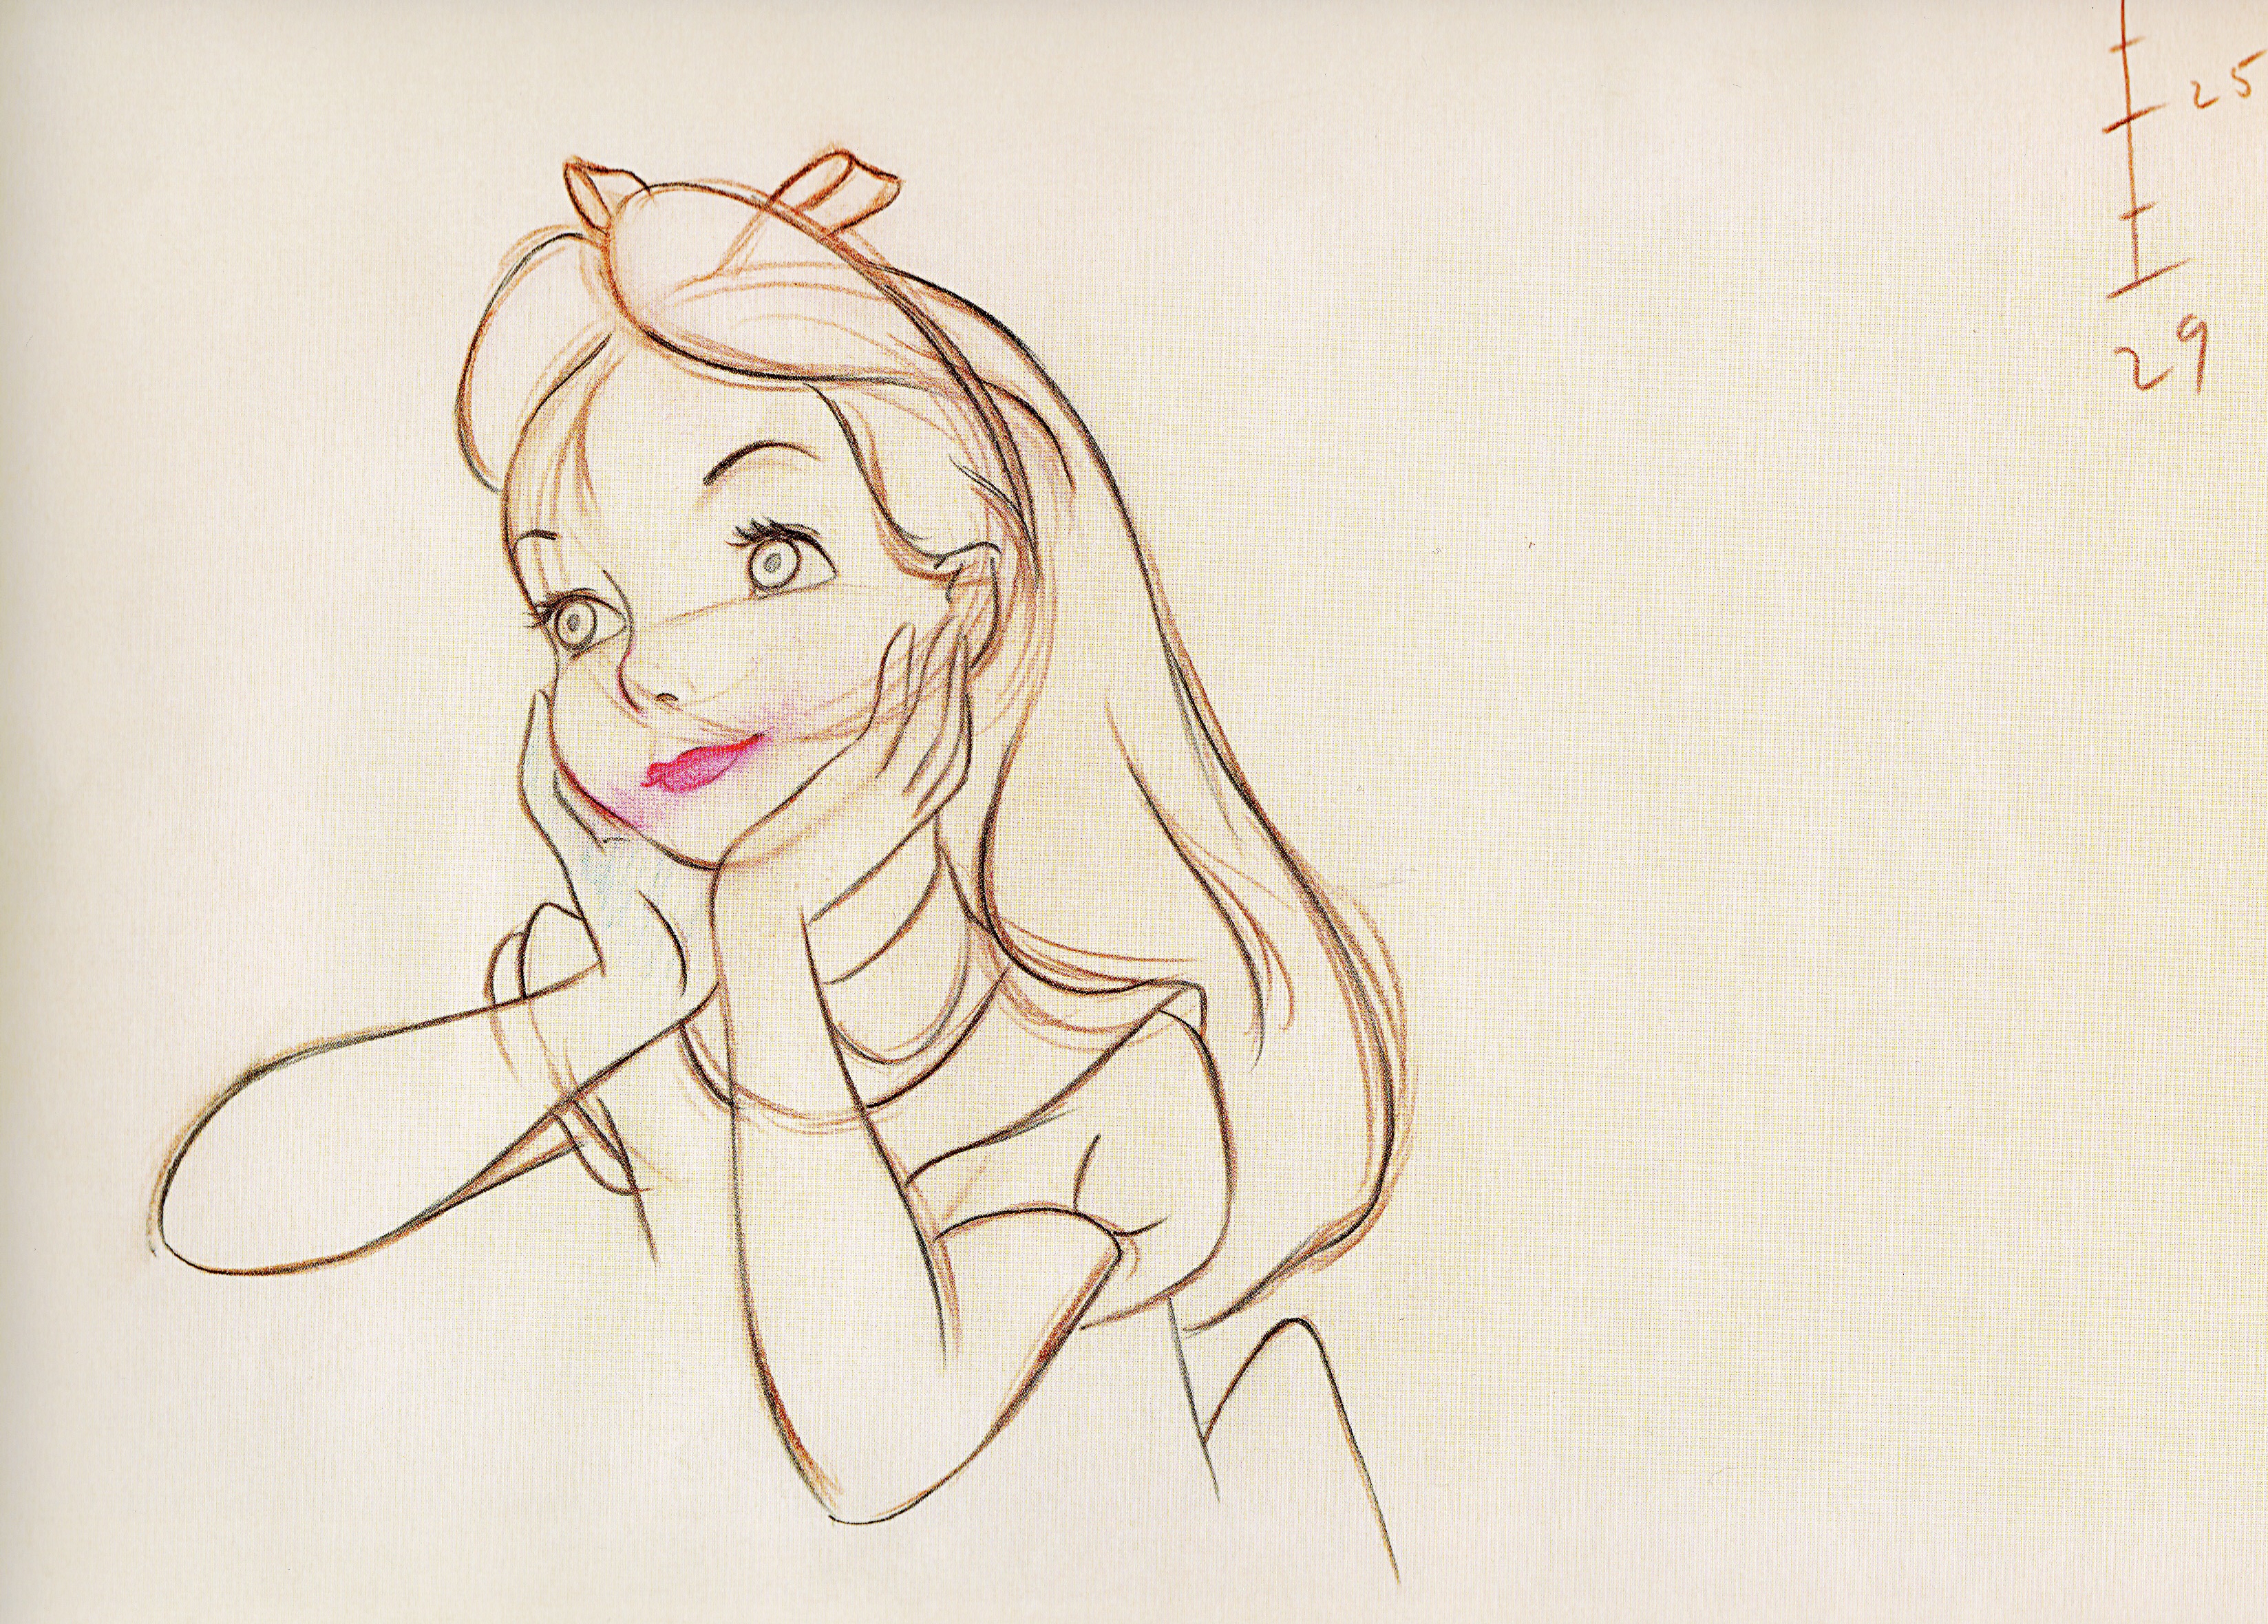 disney characters sketches